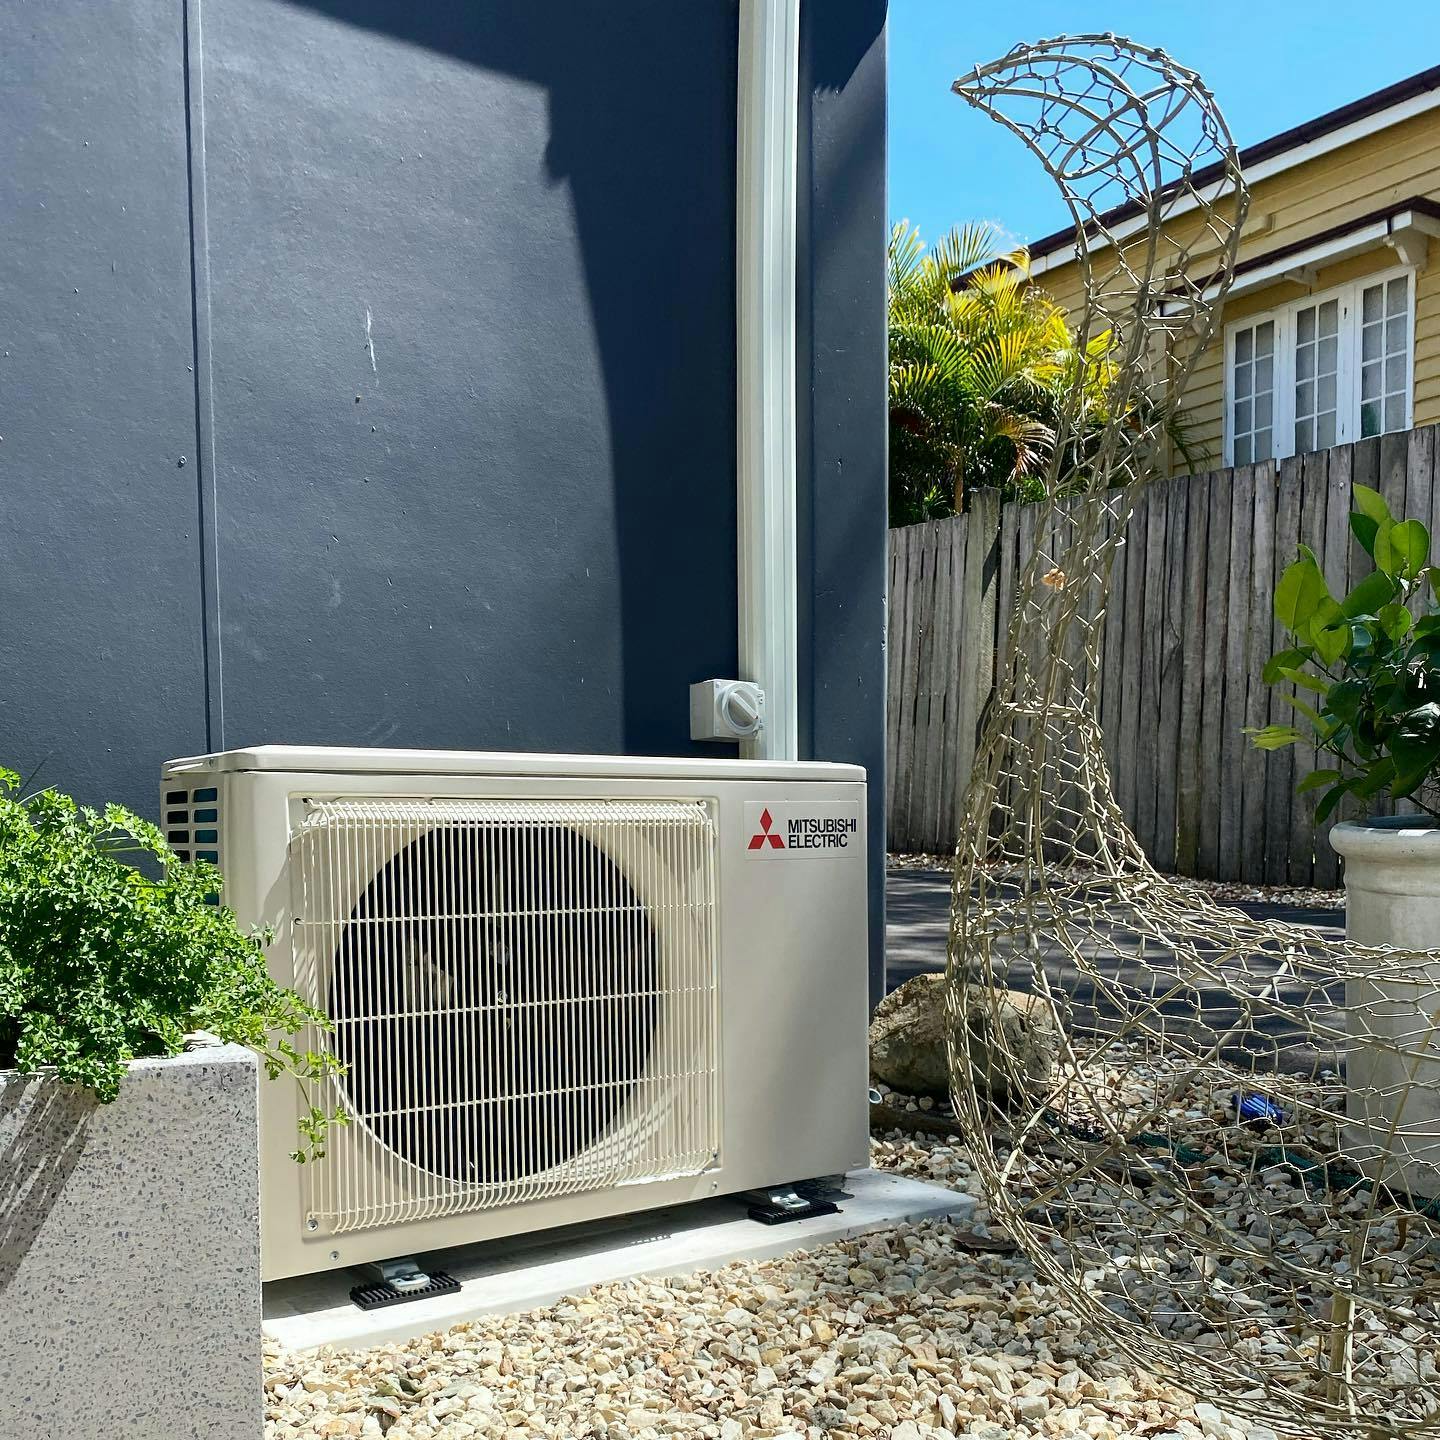 Image of air conditioning unit